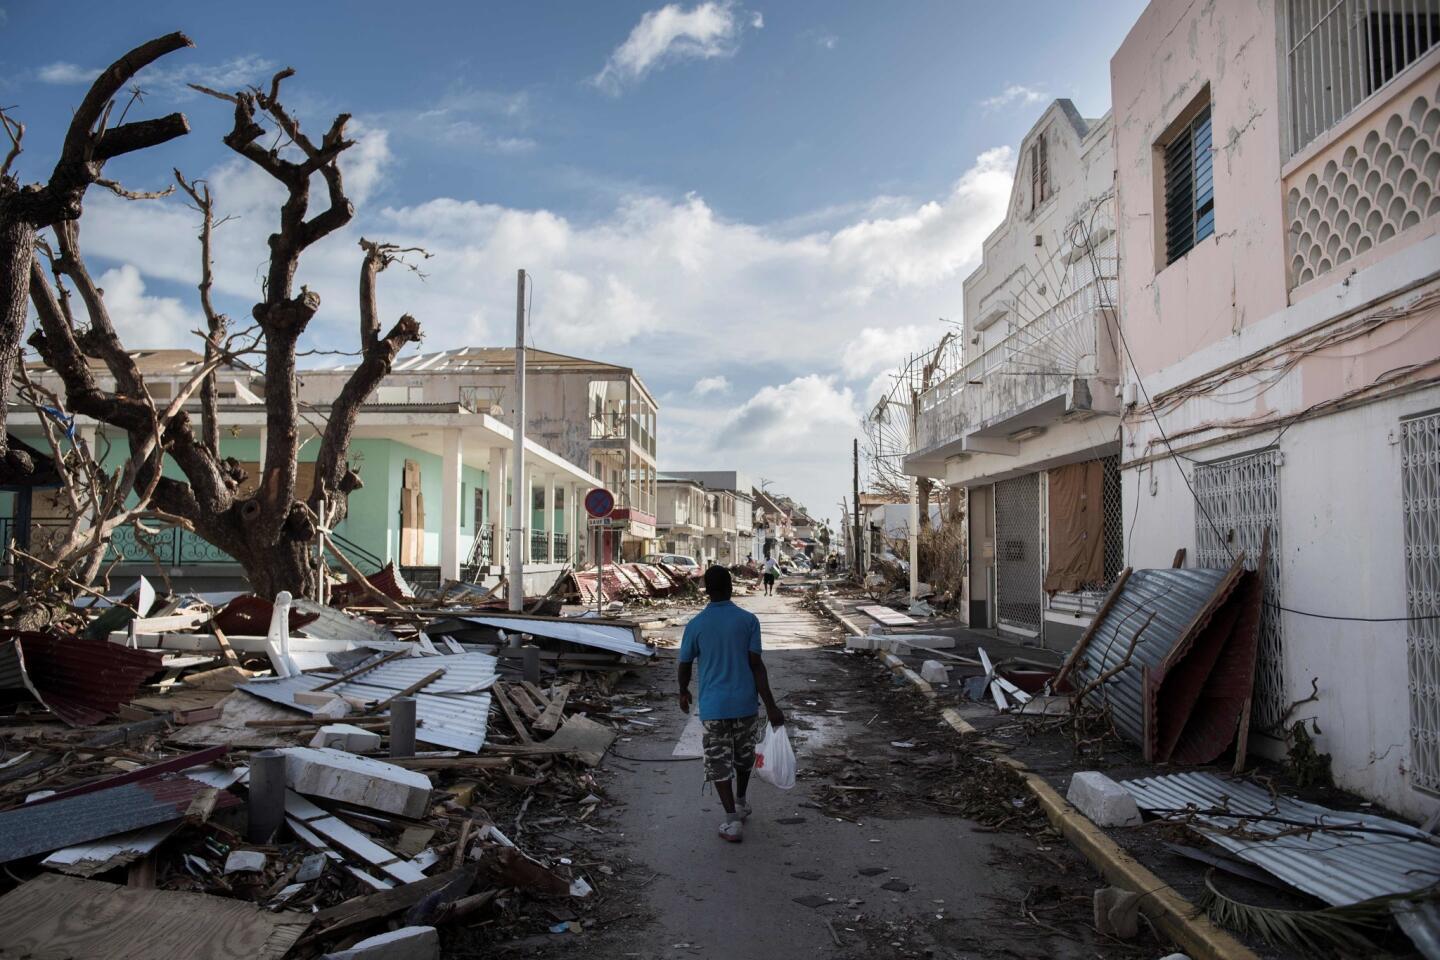 A man walks on a street covered in debris left behind by Hurricane Irma on the French island of Saint Martin, near Marigot, on Sept. 8, 2017.